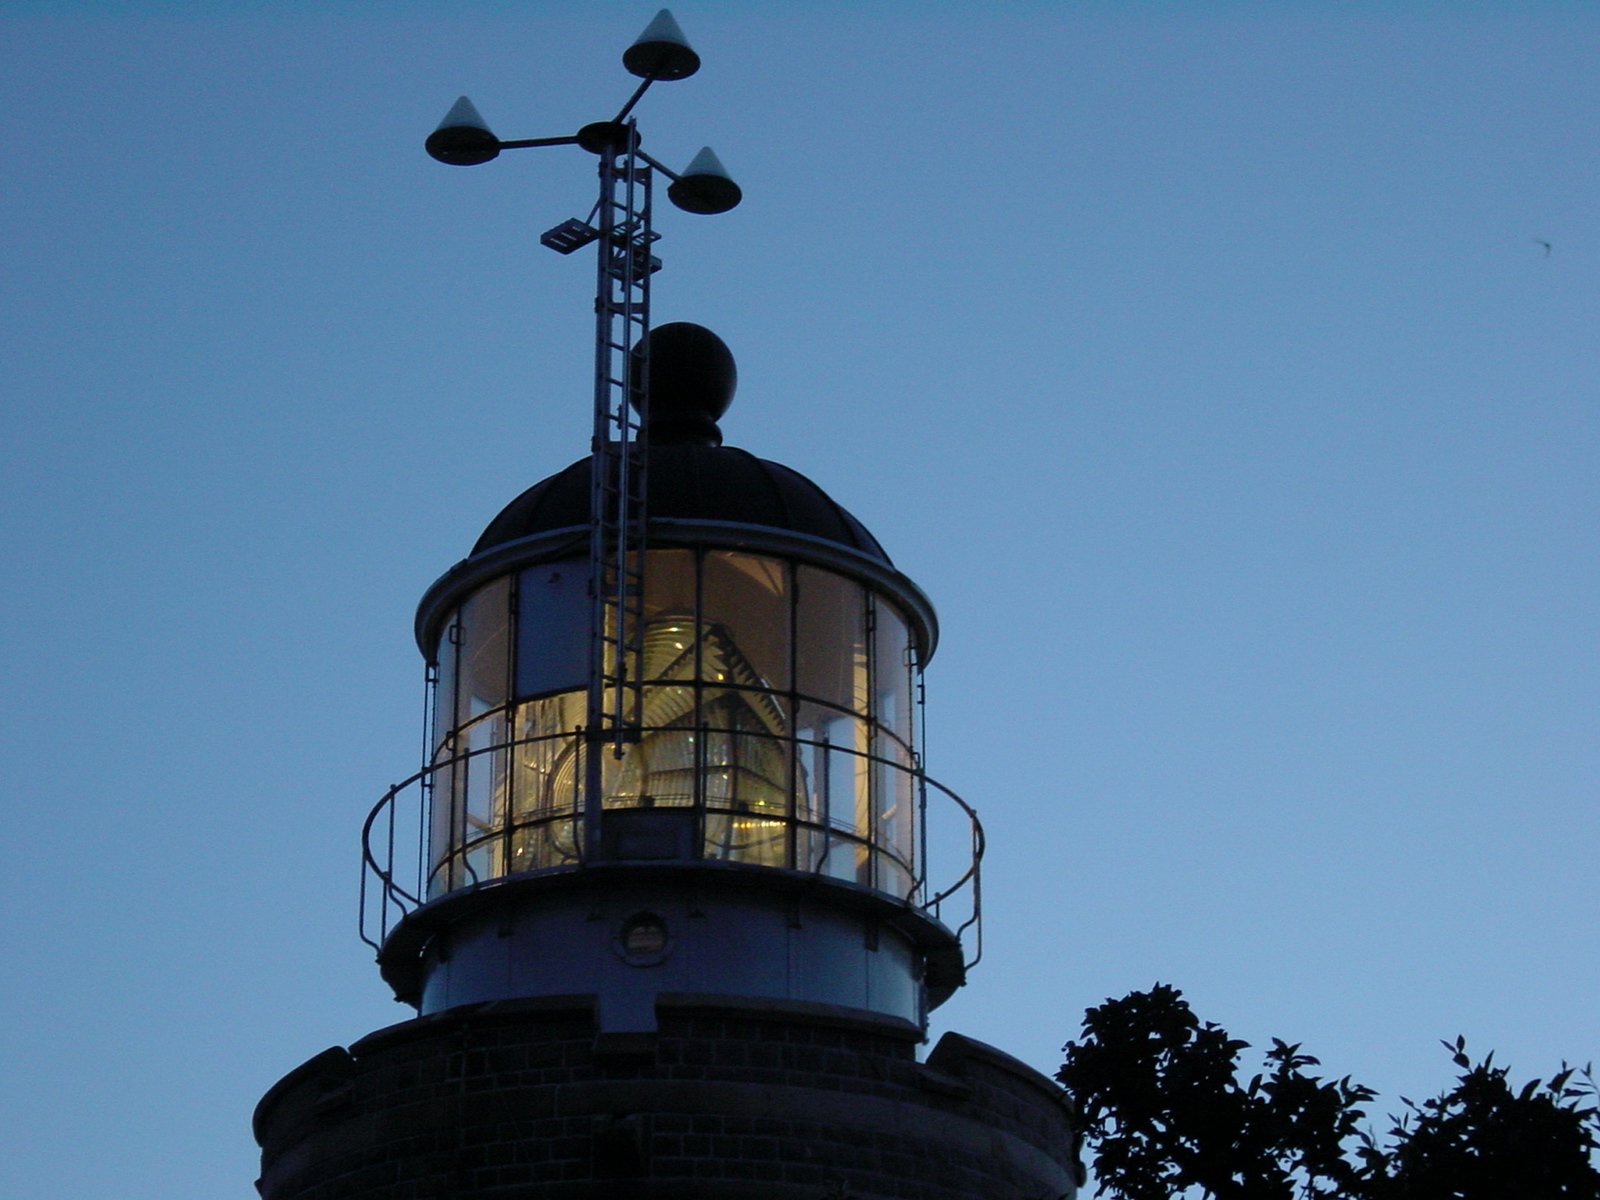 the view of a lighthouse from below, at dusk